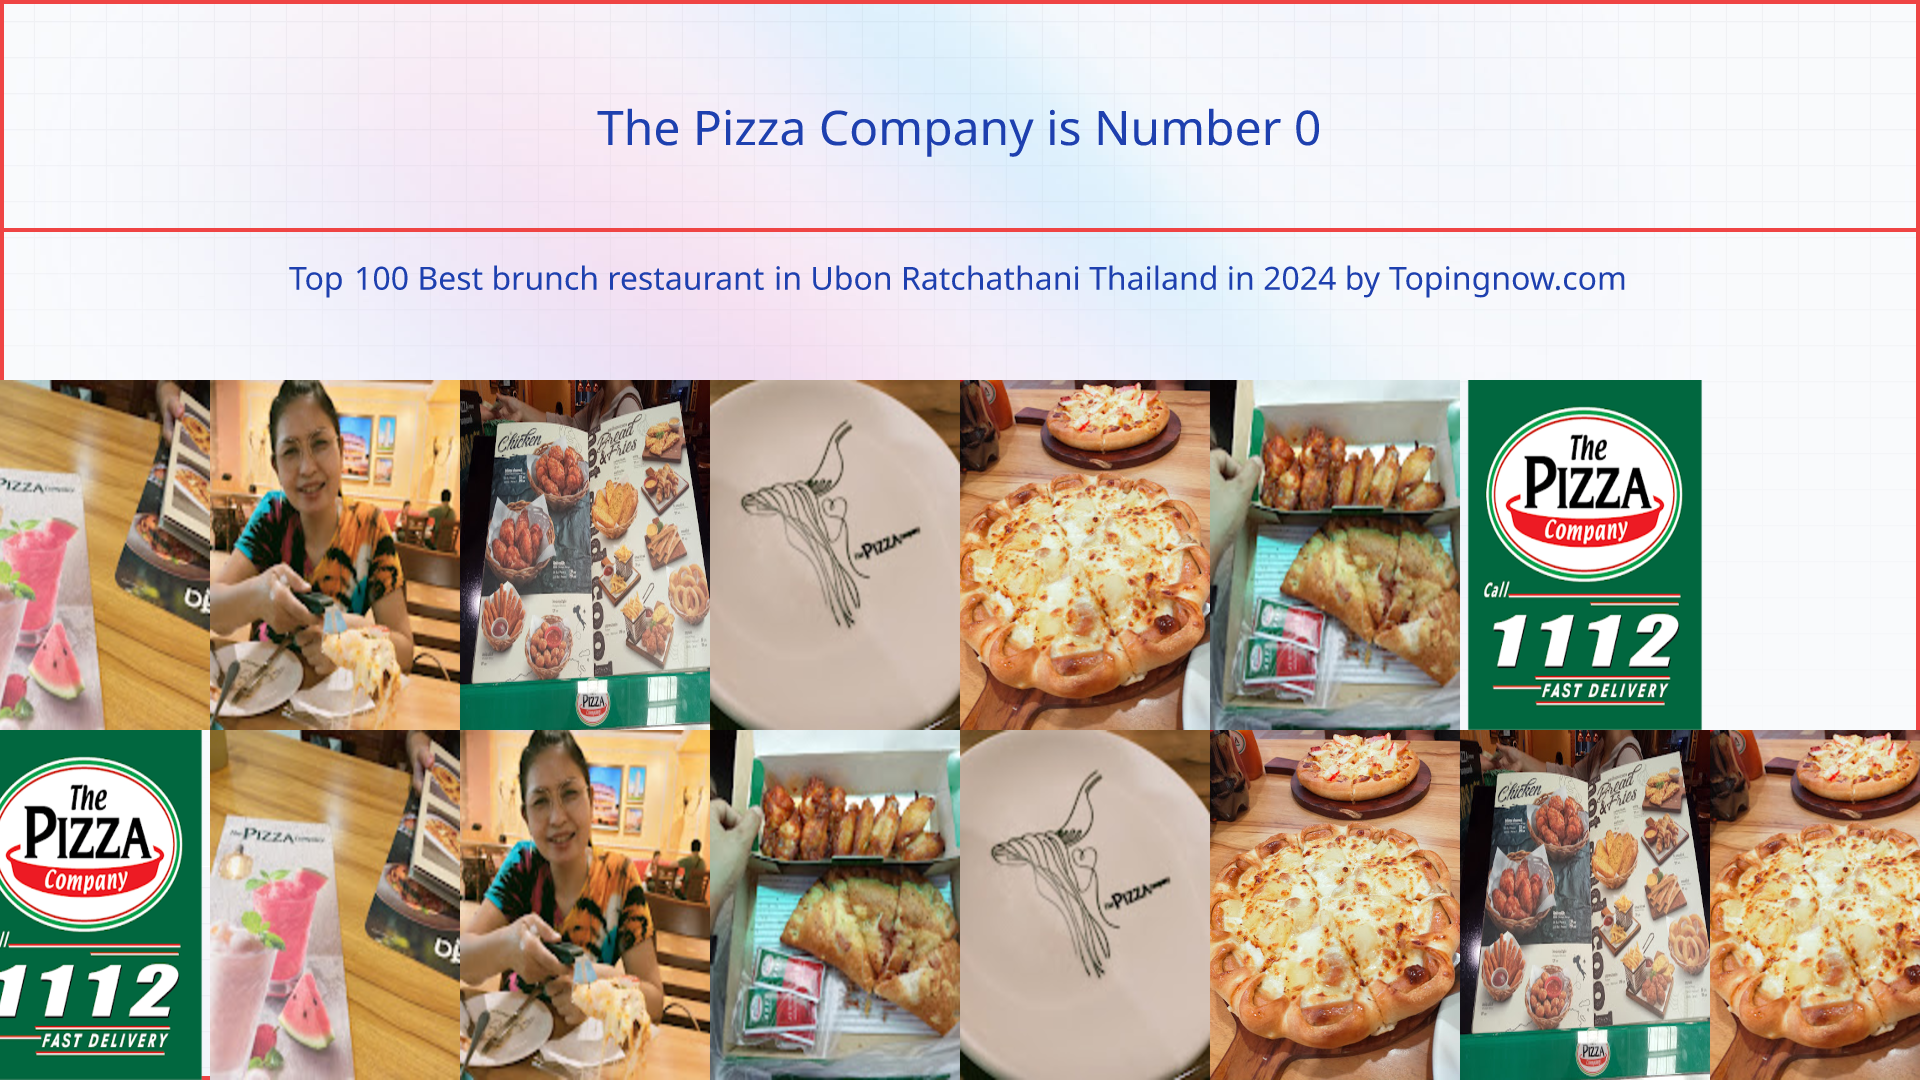 The Pizza Company: Top 100 Best brunch restaurant in Ubon Ratchathani Thailand in 2024